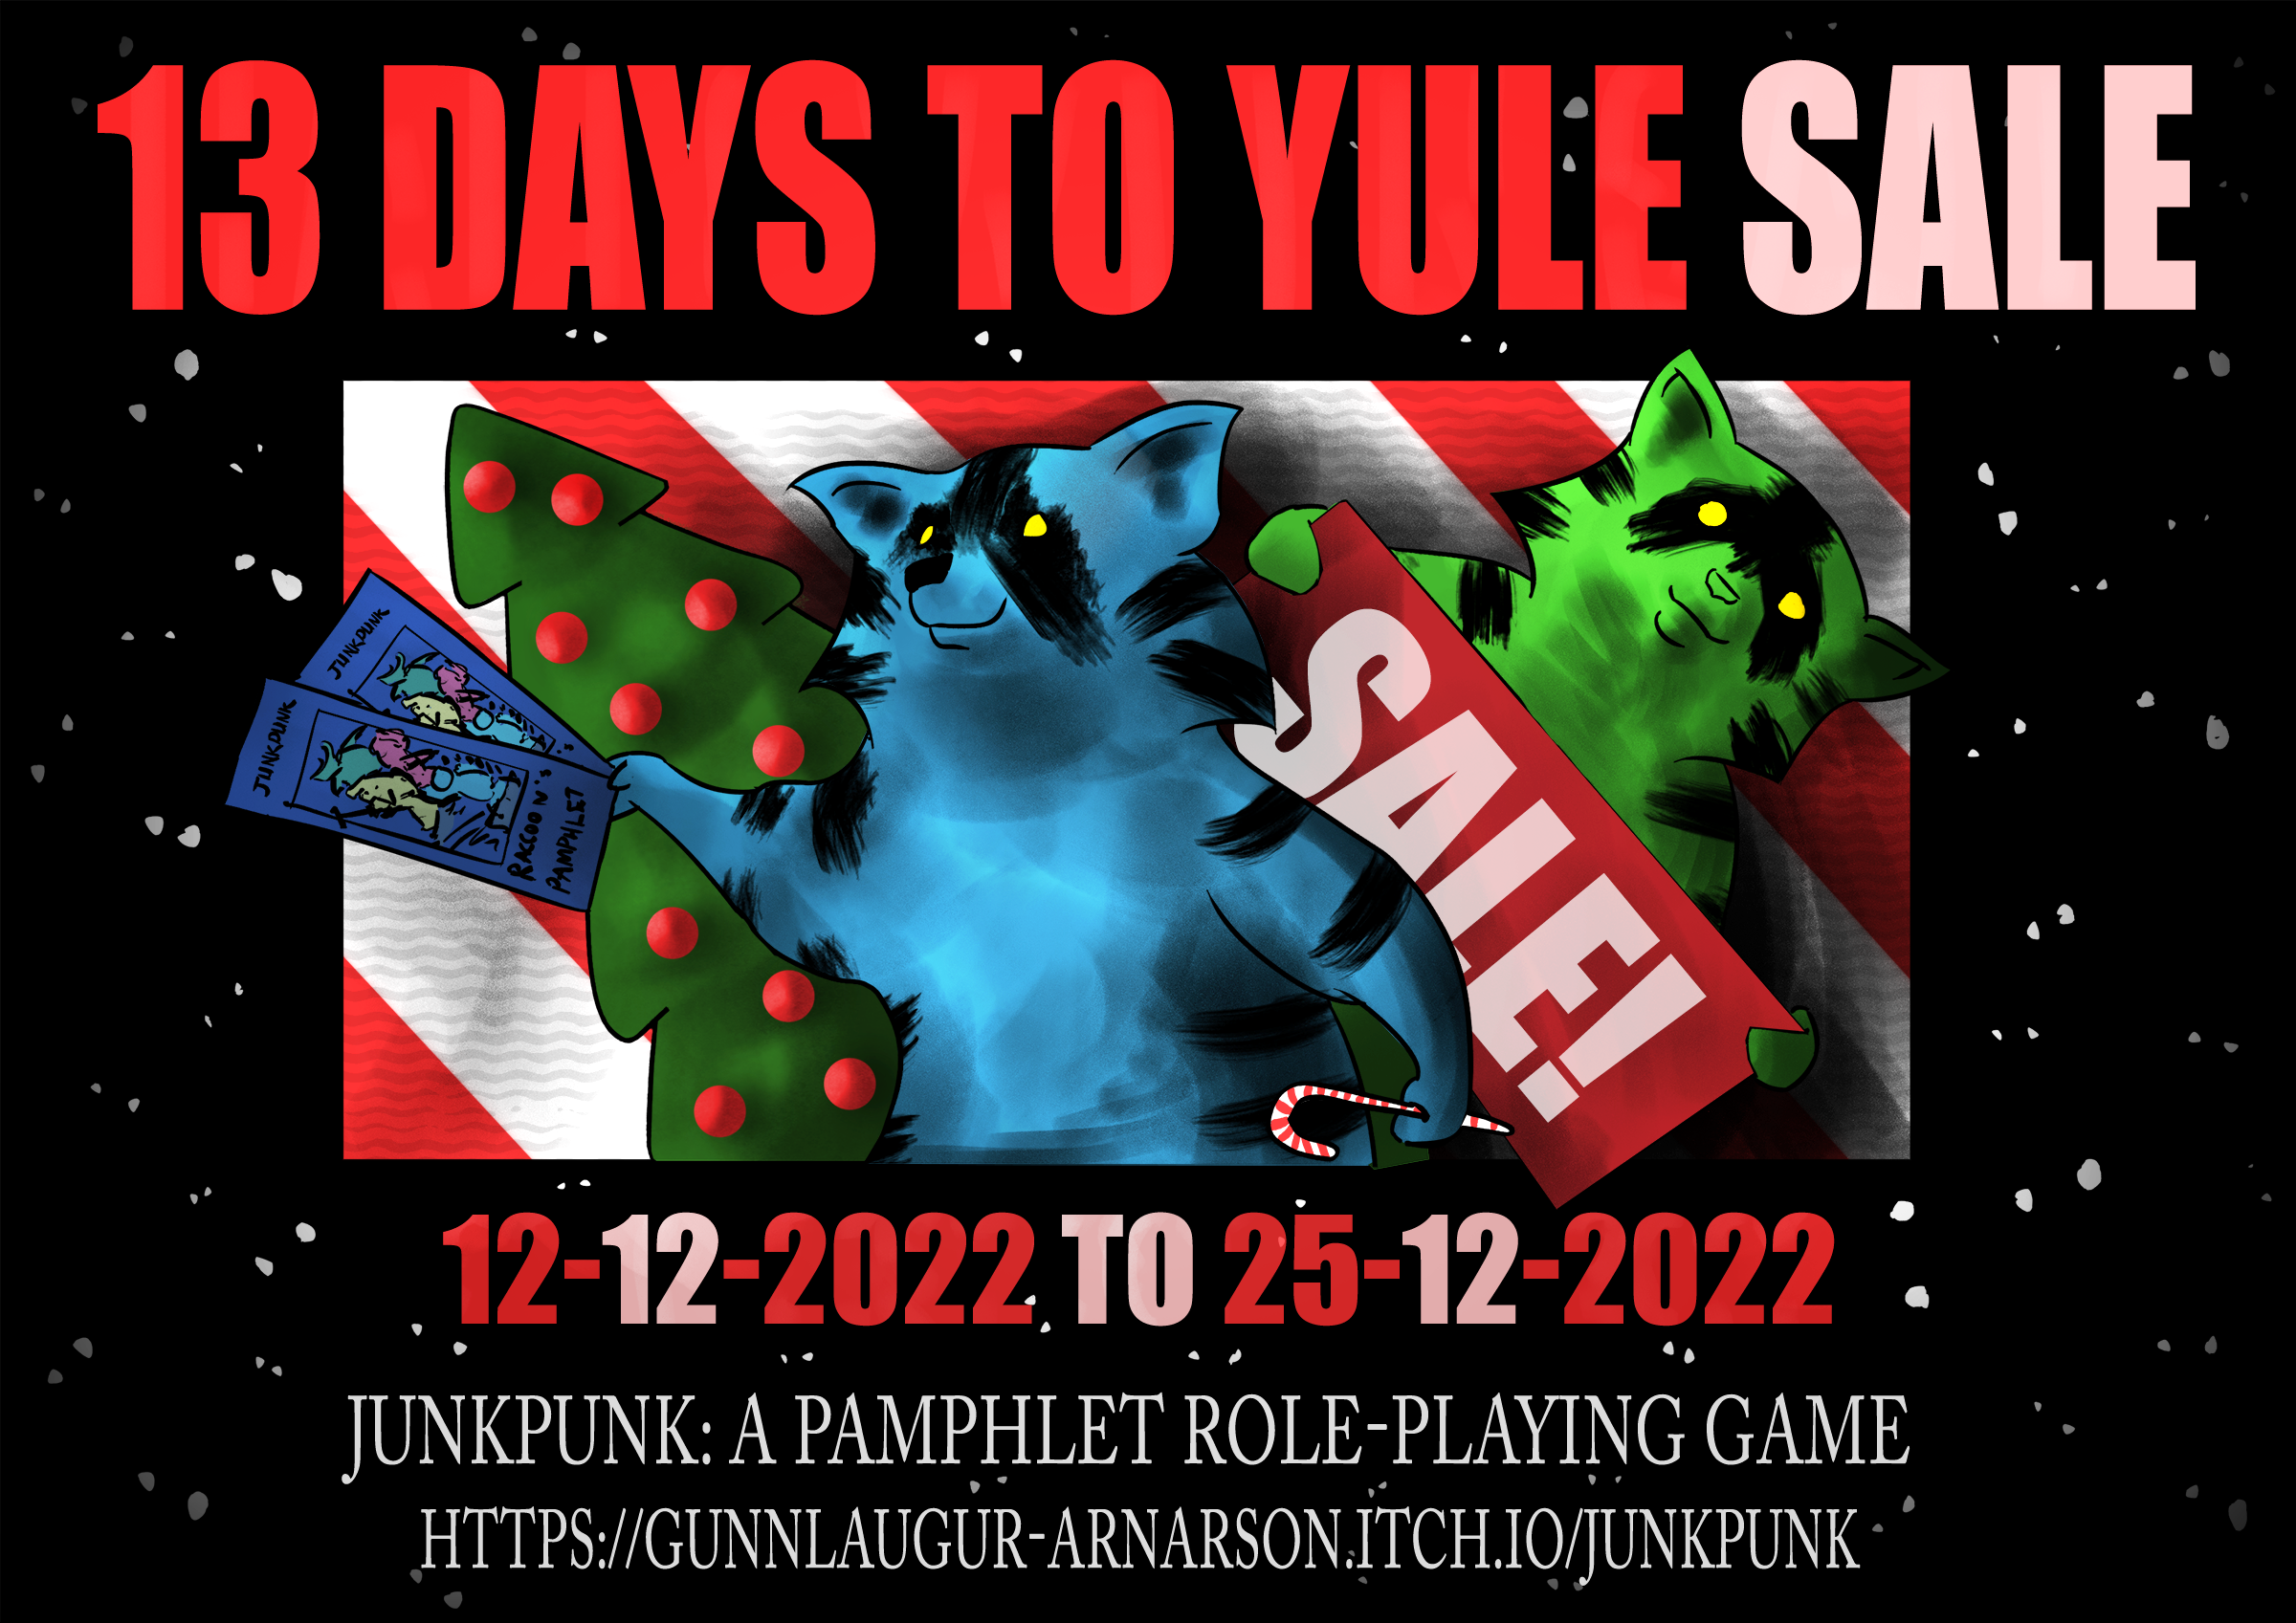 13 Days to Yule Sale!